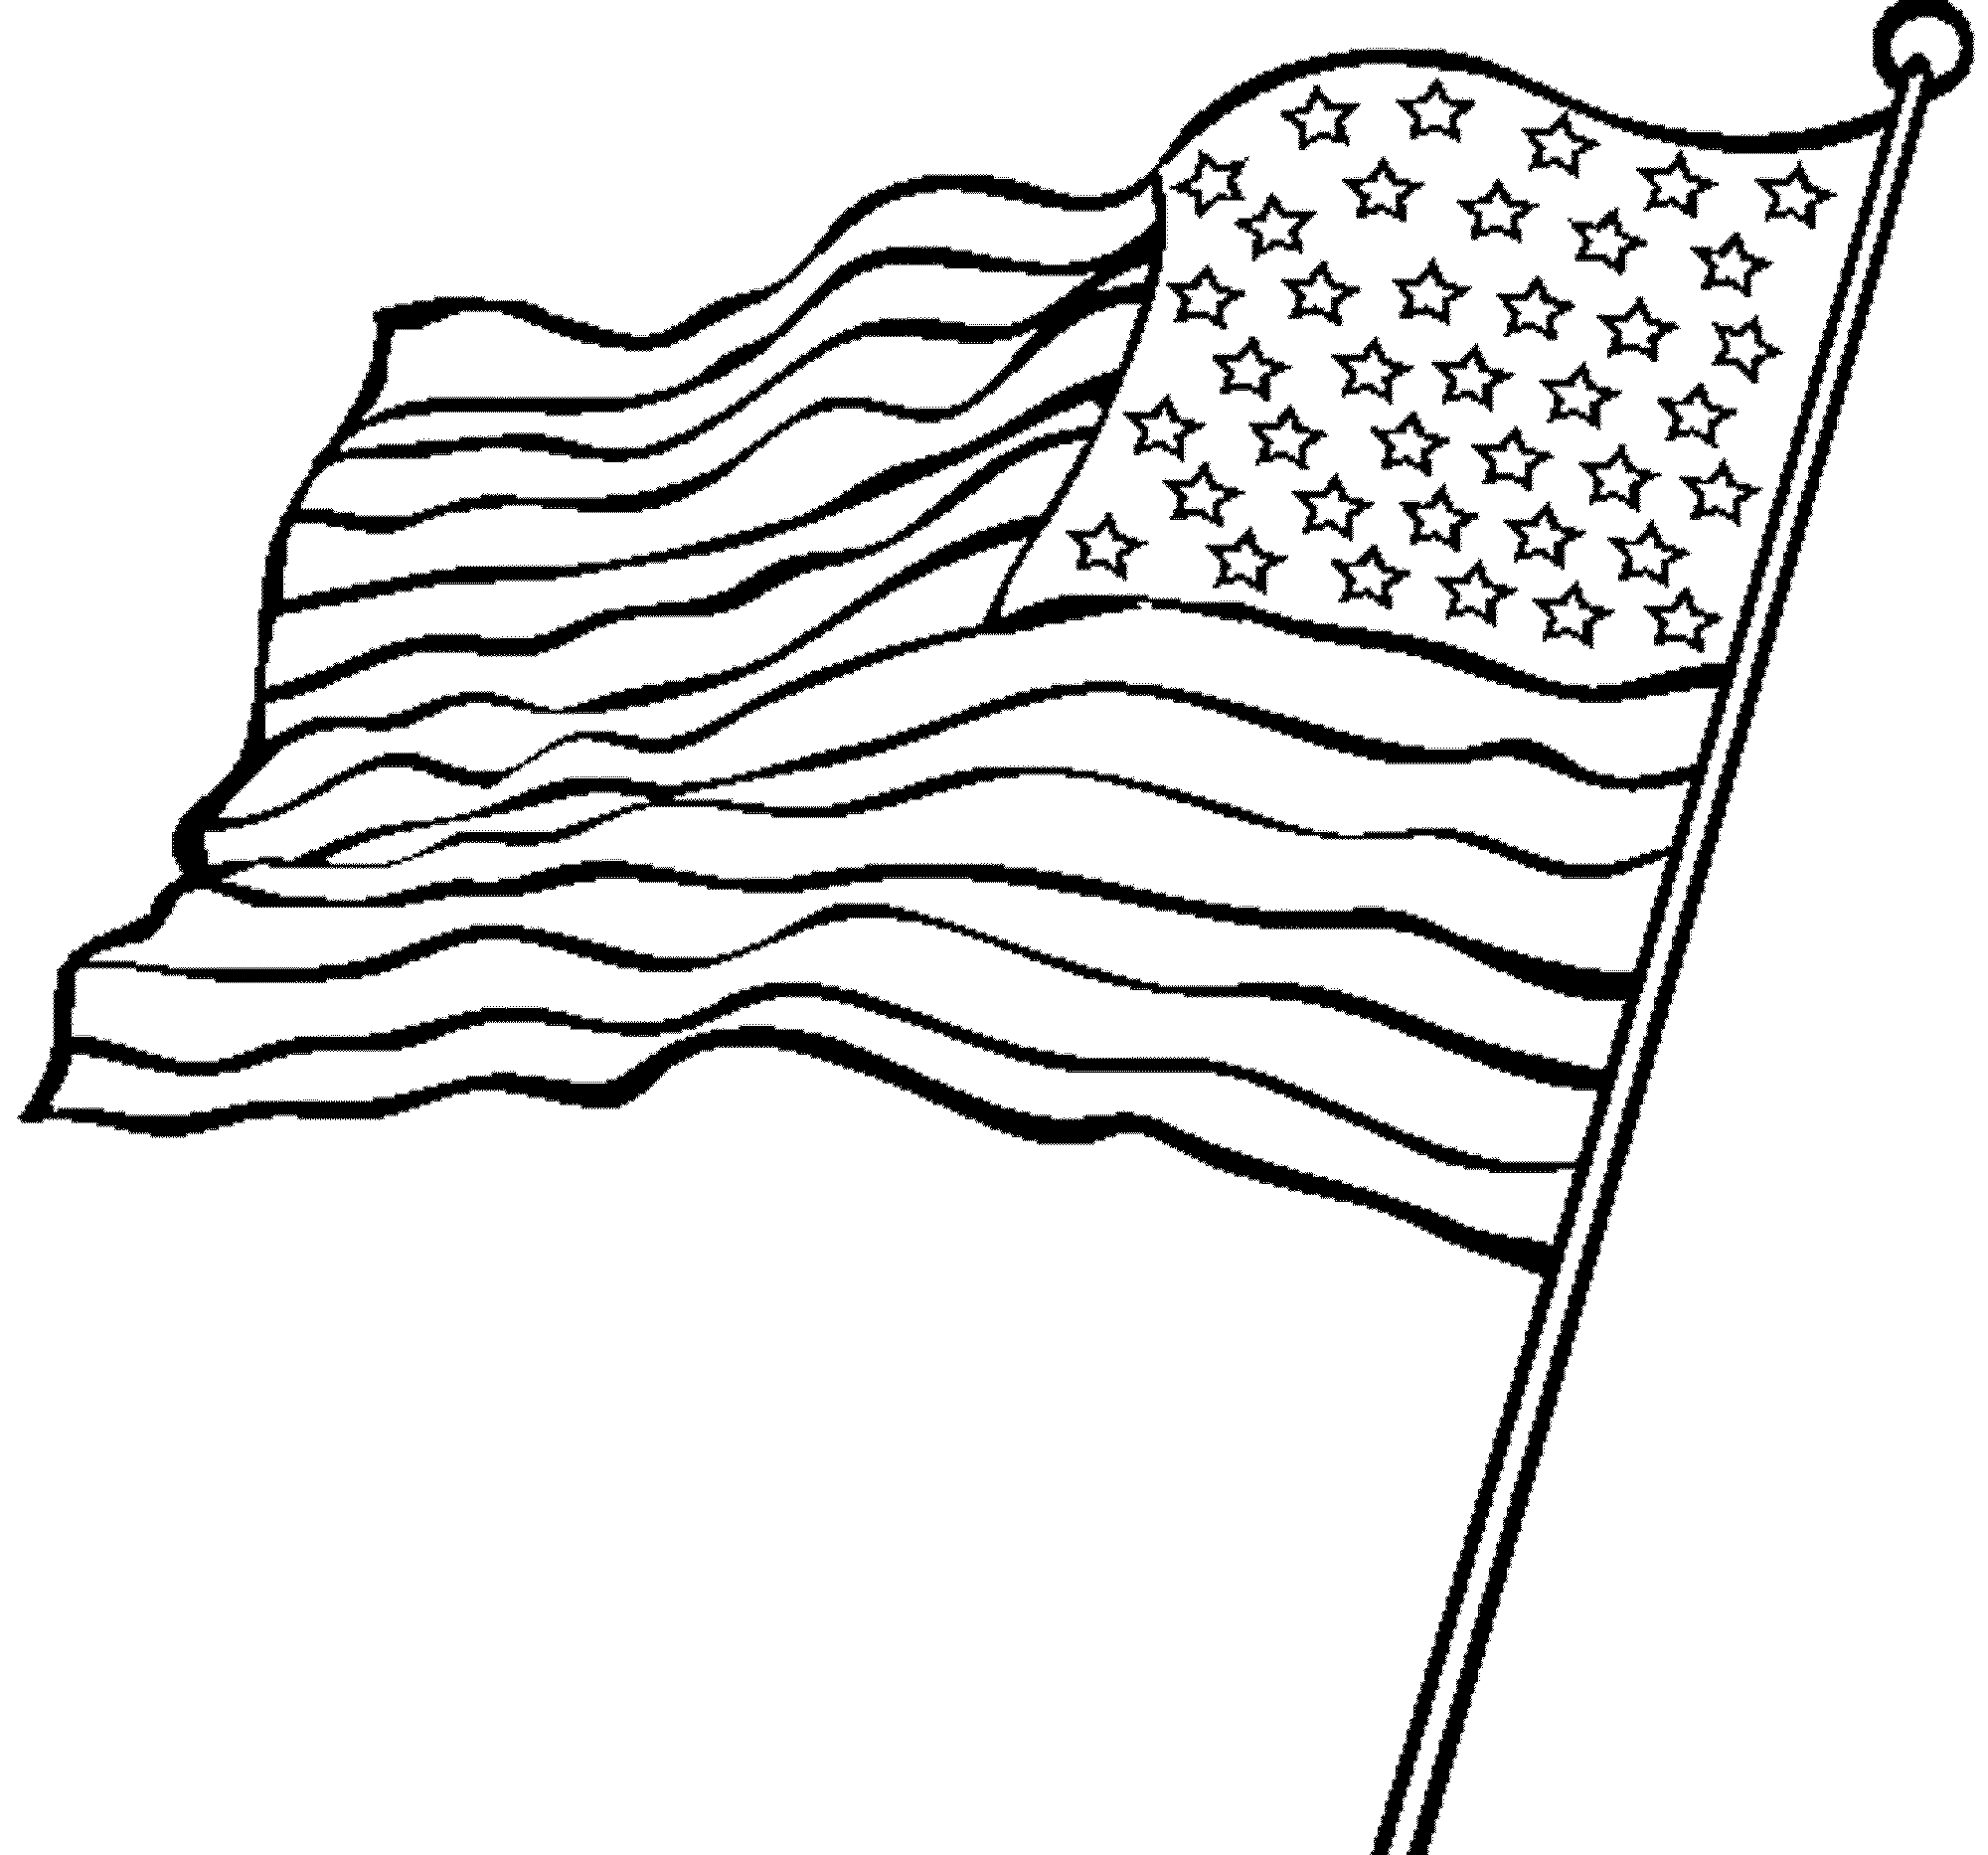 american flag coloring pages american flag coloring pages best coloring pages for kids american flag coloring pages 